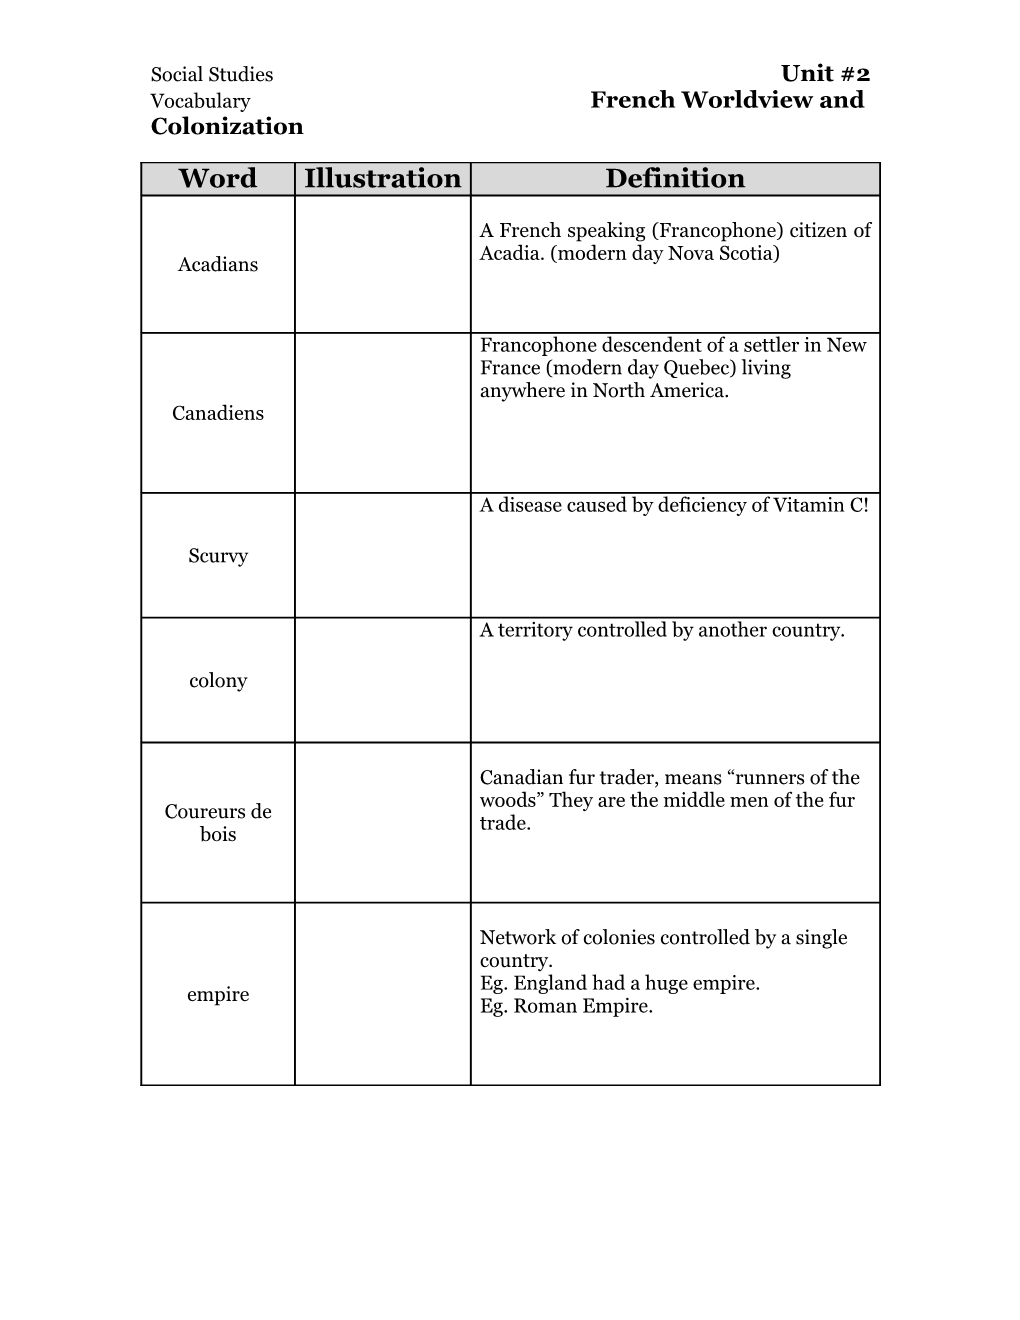 Vocabulary French Worldview and Colonization